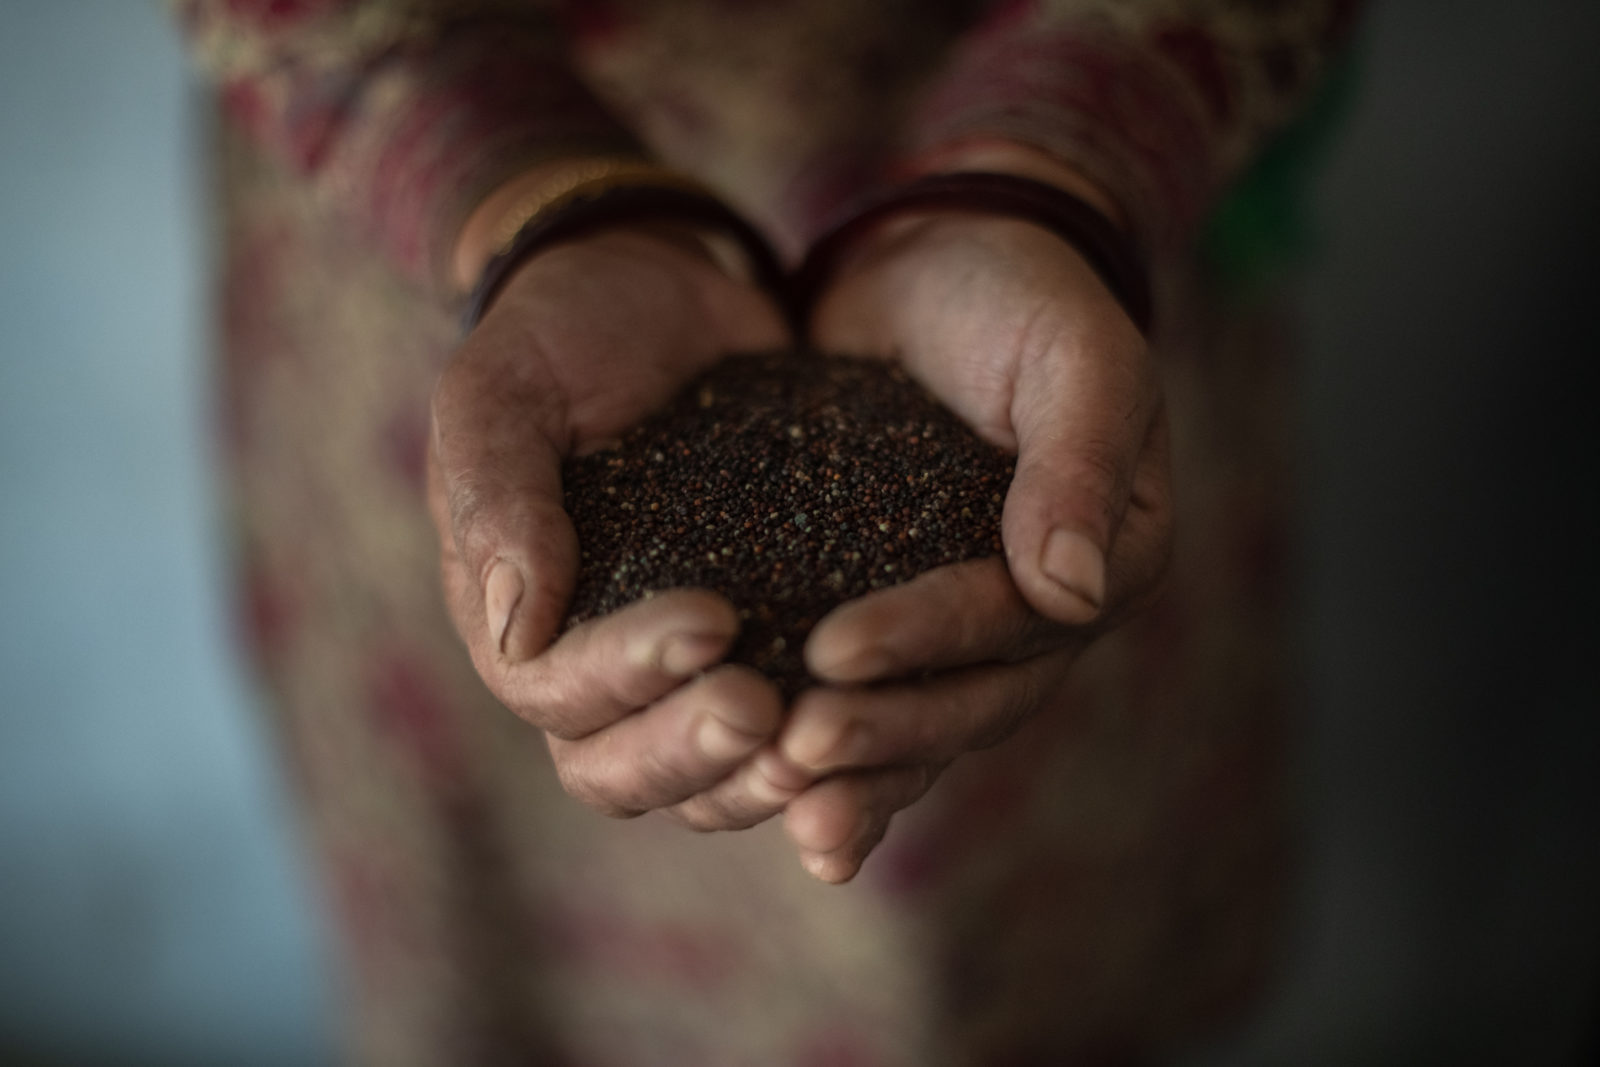 A close up of a woman's hands holding finger millets.